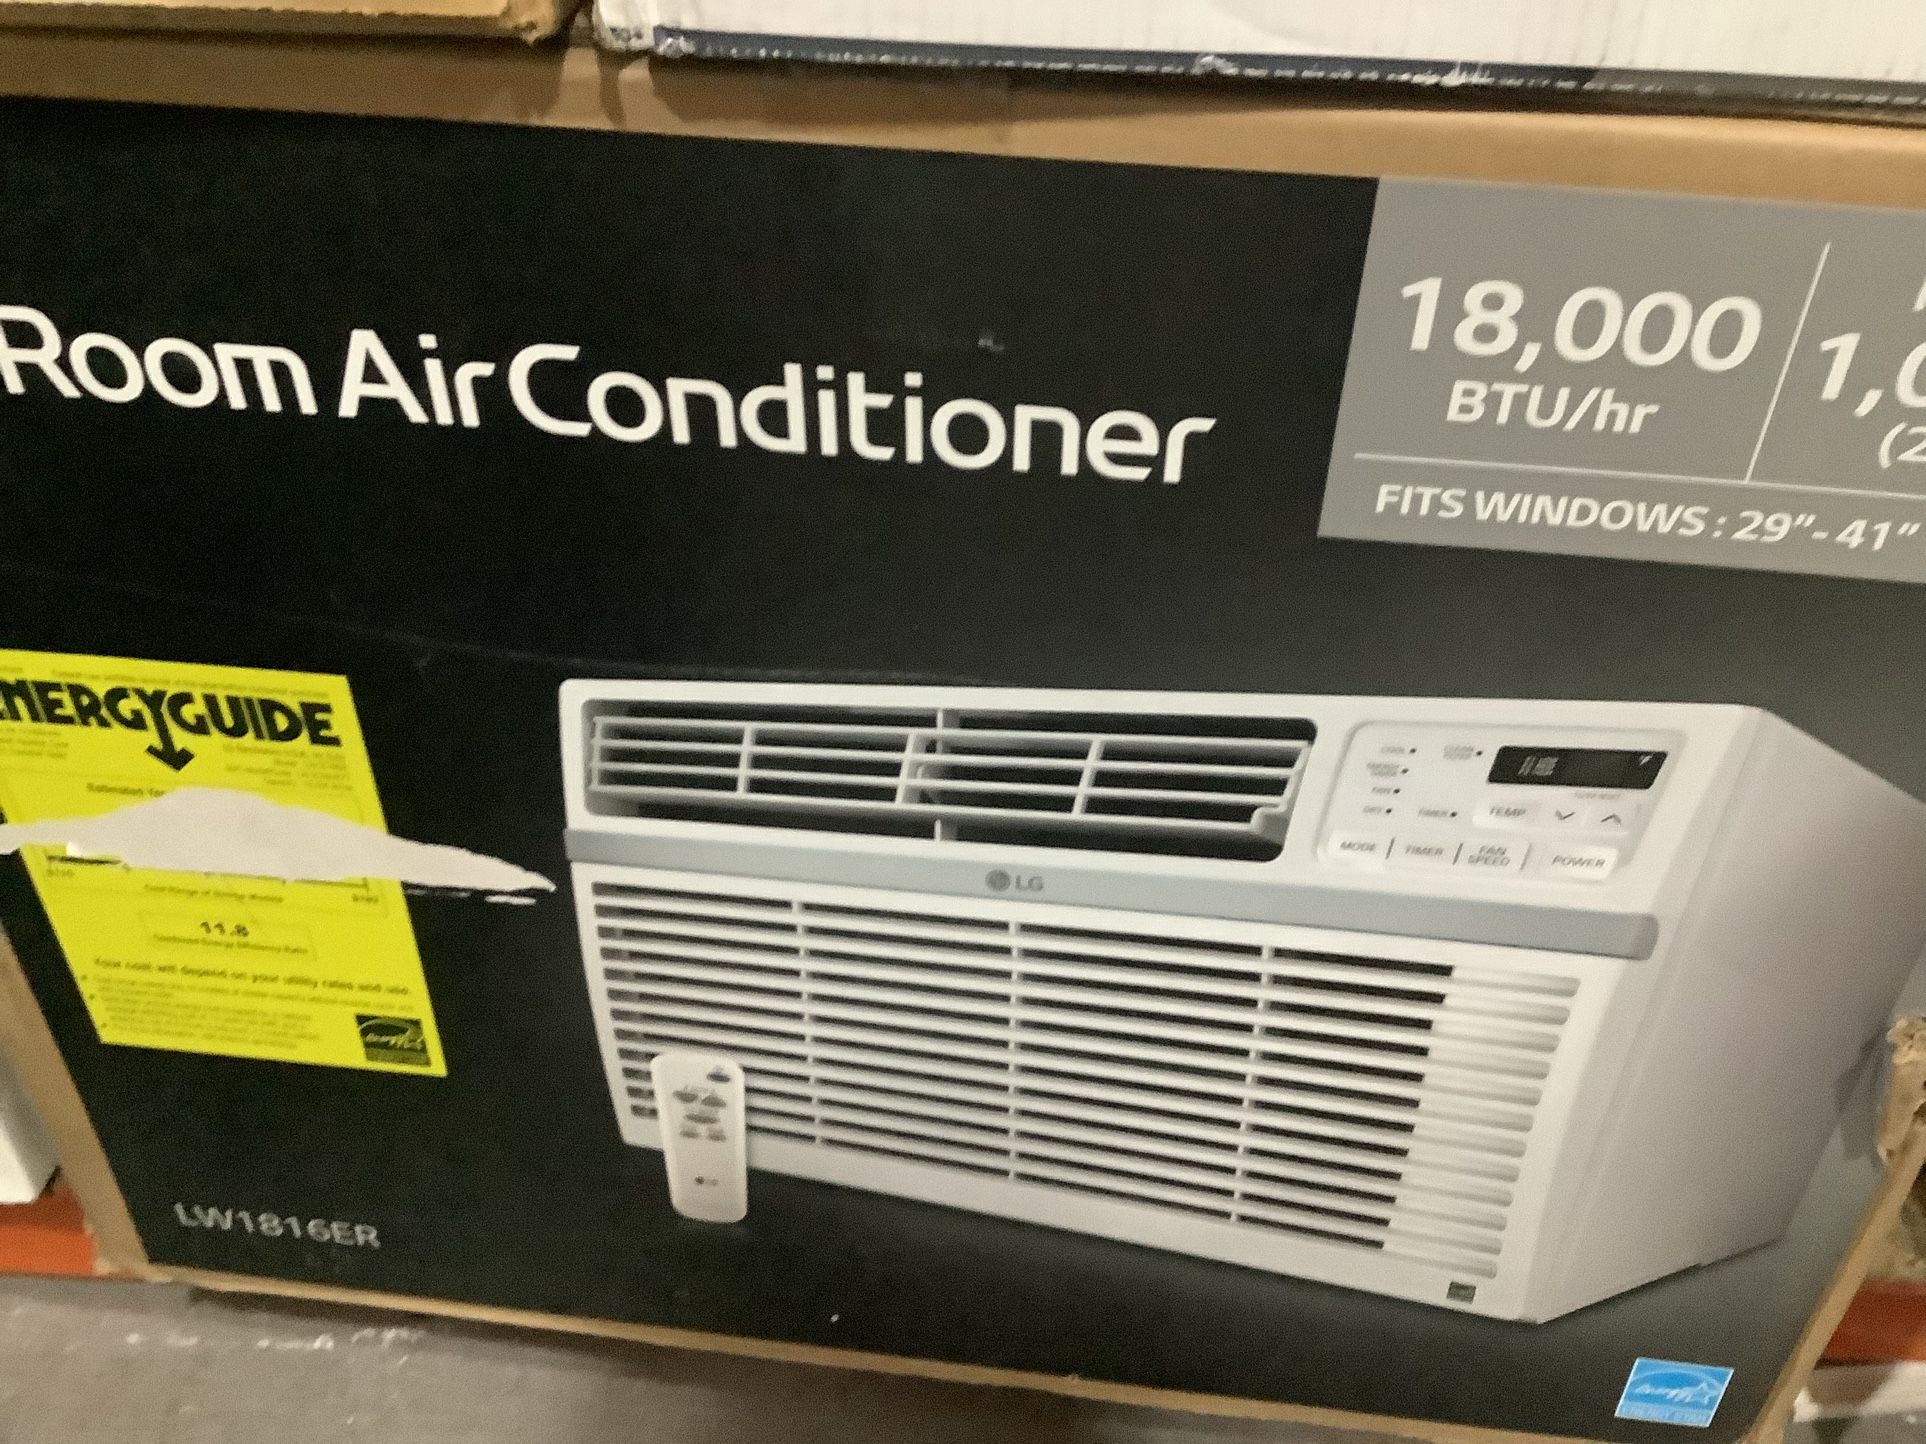 LG 18,000 BTU Window Air Conditioner Cools 1000 sq. ft. , Portable AIRCONDITIONERS, Humidifiers $150-$600